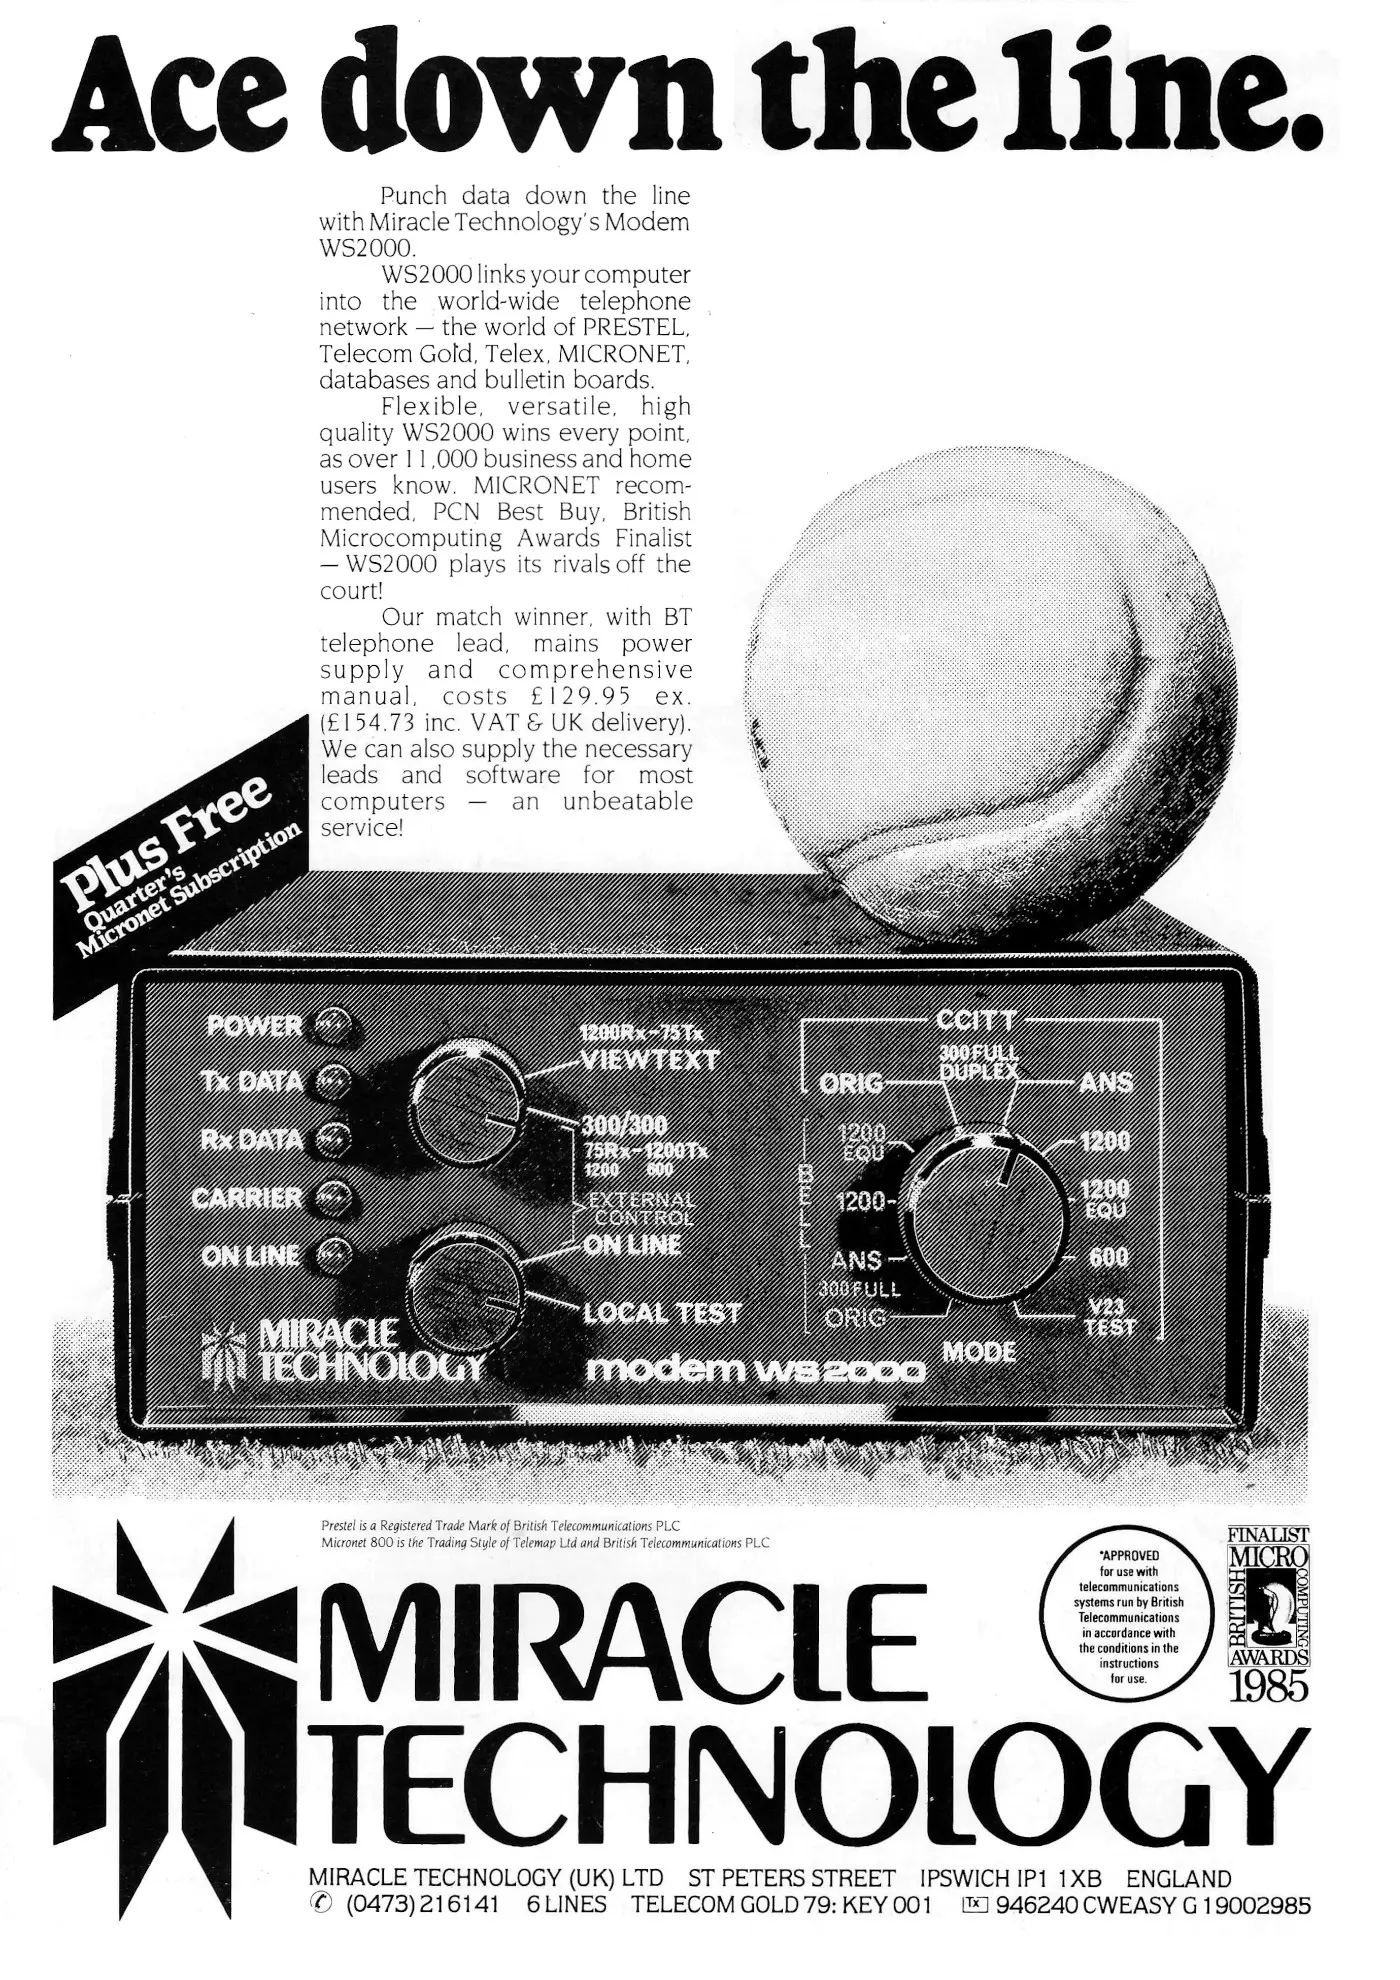 Miracle Technology Advert: Miracle Technology WS2000 Modem: Ace Down The Line, from Personal Computing Today, September 1985